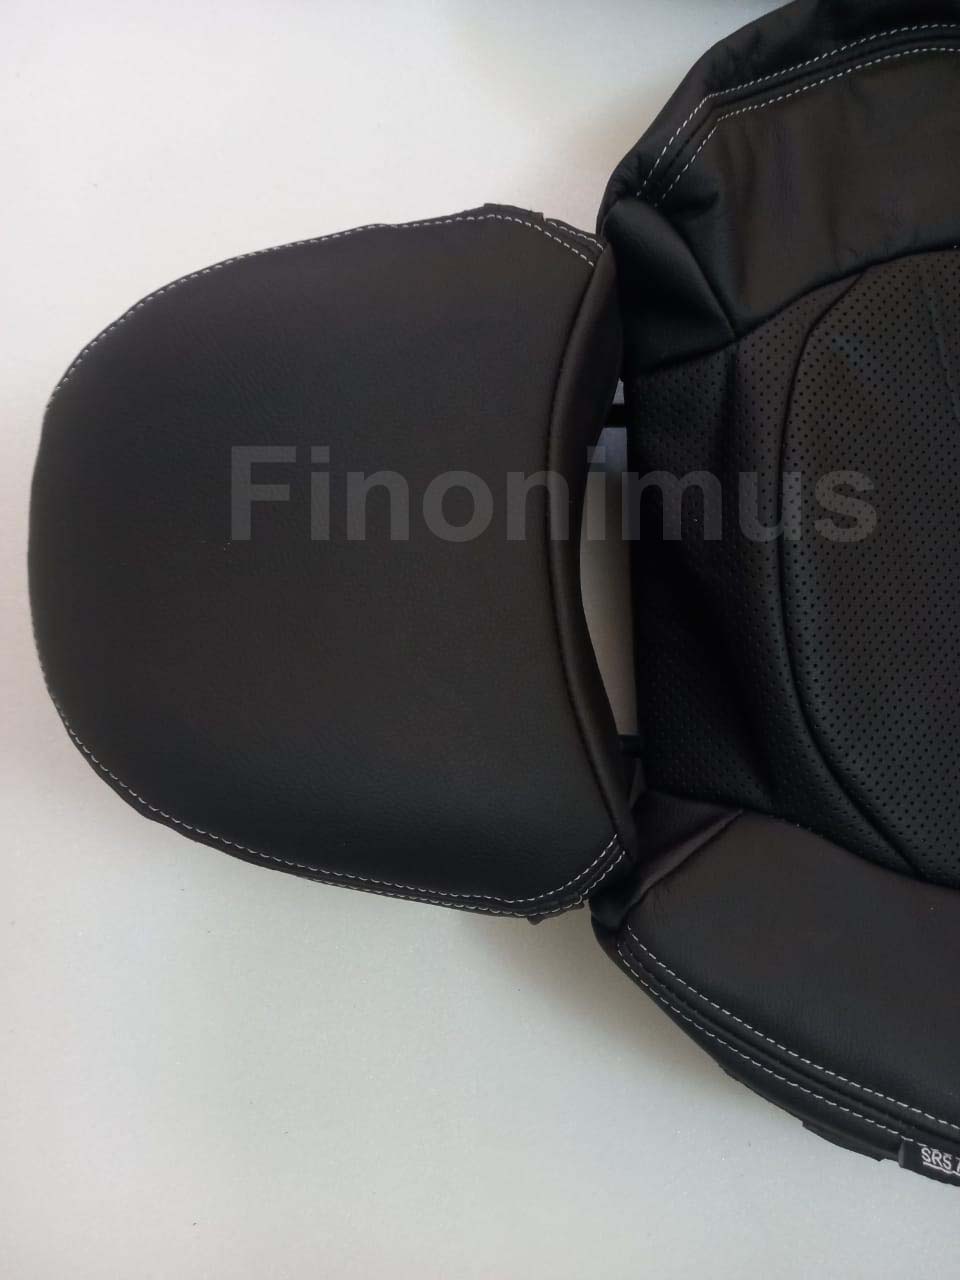 Honda CRZ - Synthetic Leather OEM replacement Seat Cover (Year 2011- 2016) Black